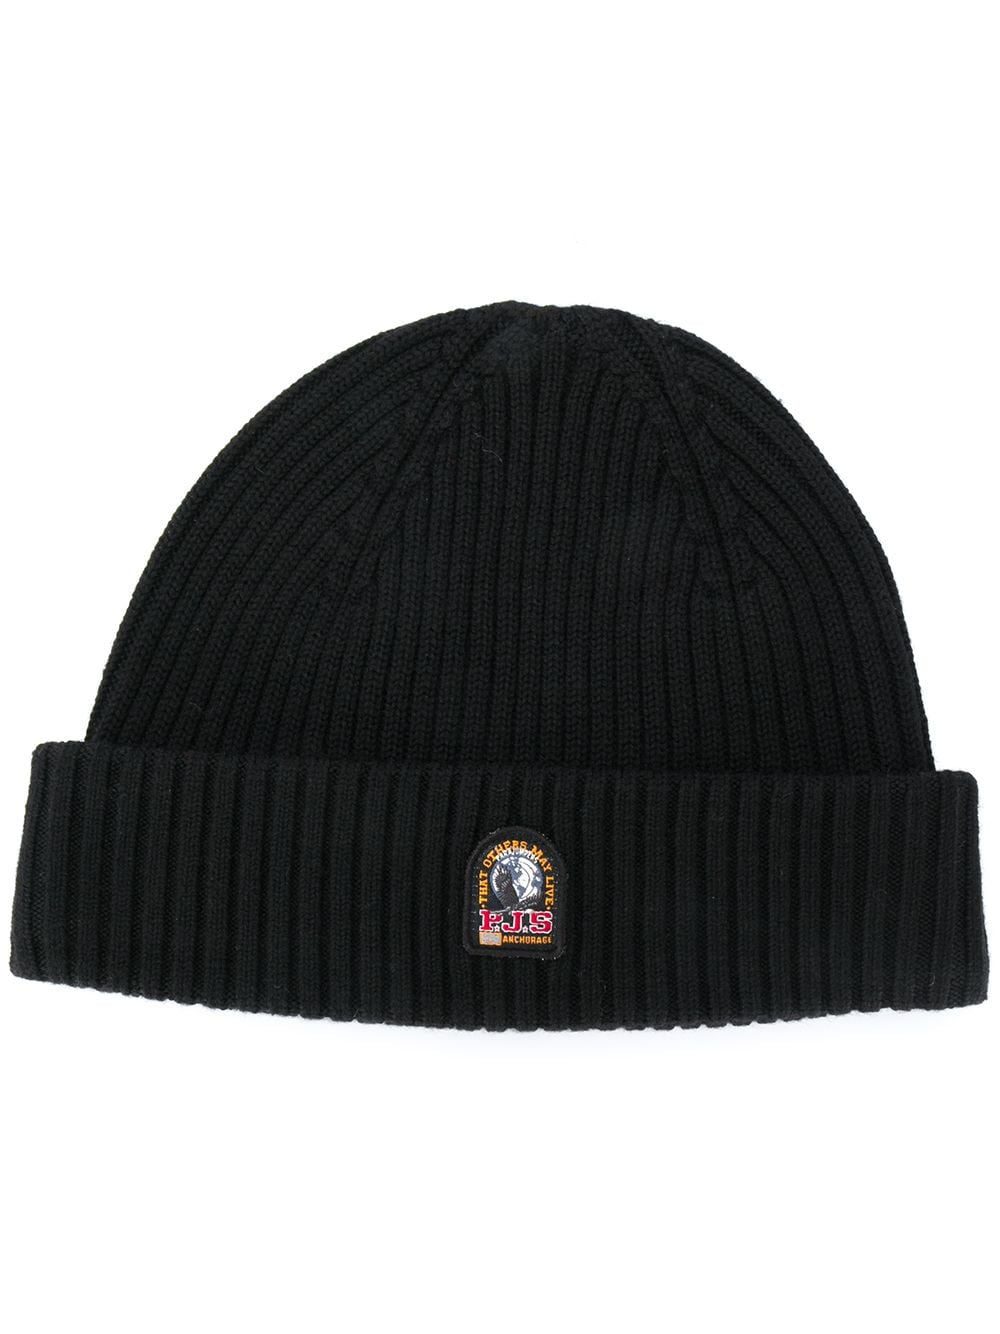 Parajumpers logo patch ribbed beanie - Black von Parajumpers